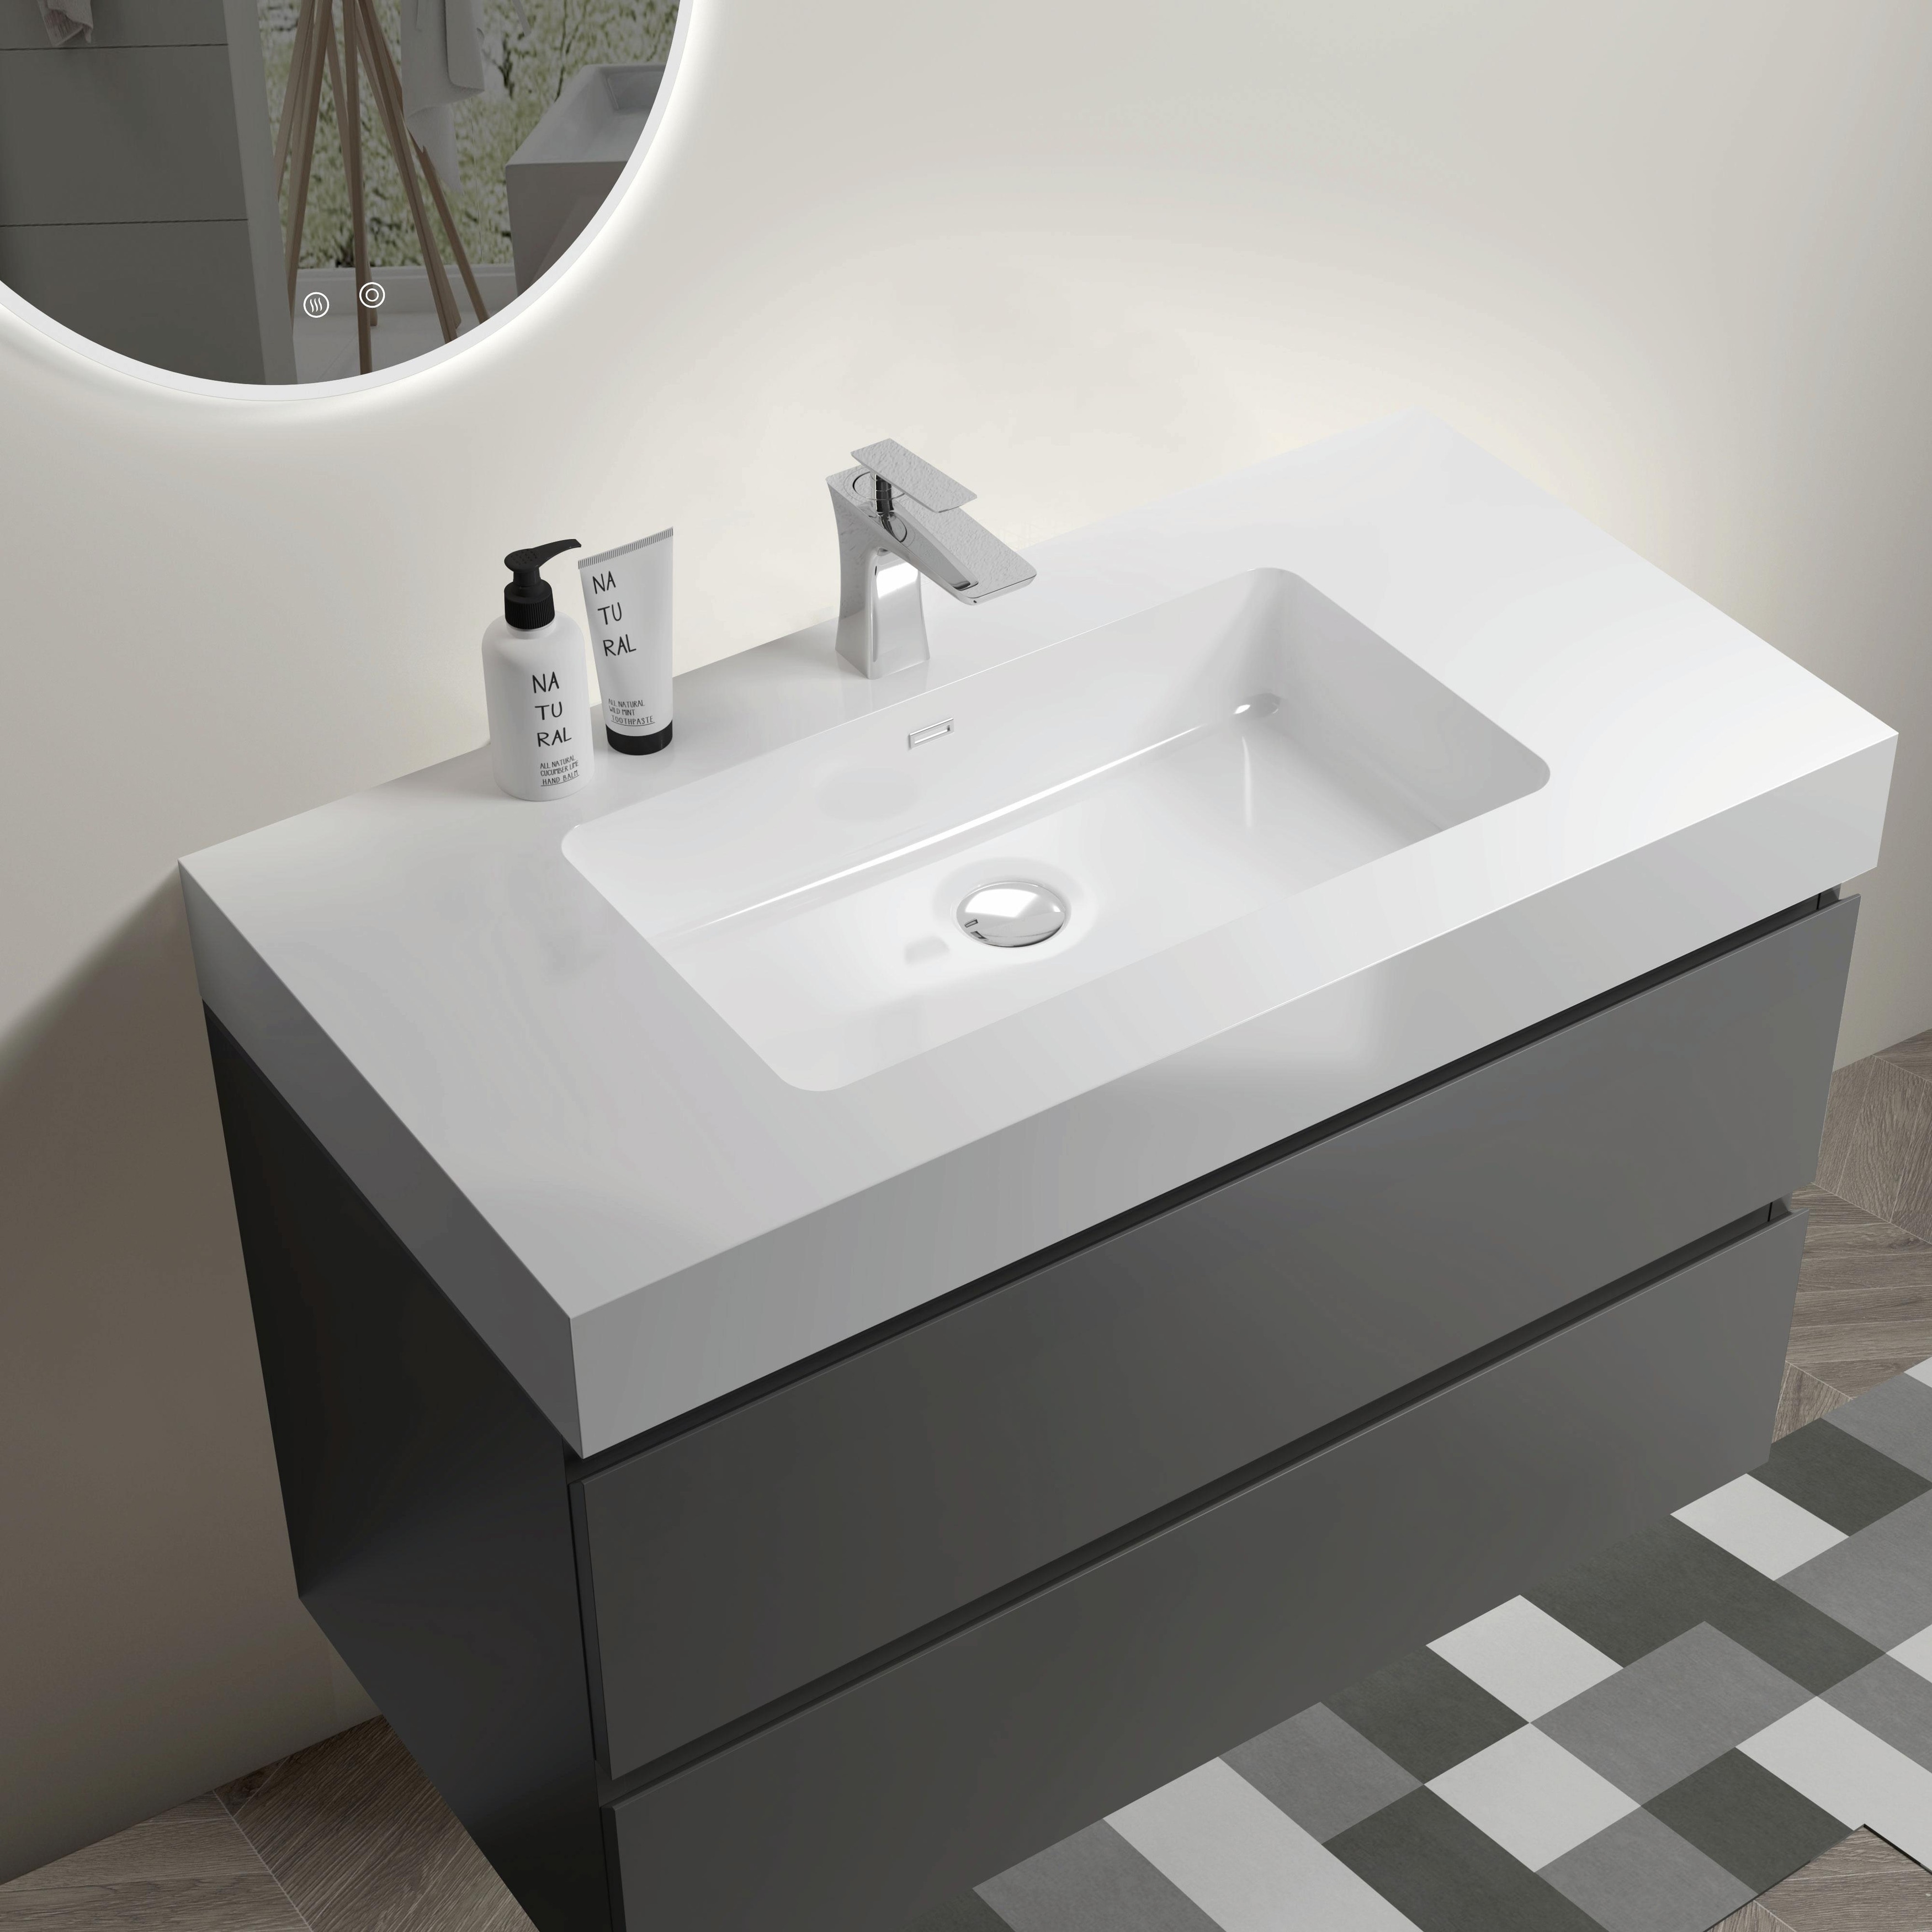 https://ak1.ostkcdn.com/images/products/is/images/direct/5a6e785f6260afa81ac54280fea479b25e8b388d/Floating-Gray-Bathroom-Vanity-with-Ample-Storage%3A-Wall-Mounted-Modern-Design%2C-One-Piece-White-Sink.jpg